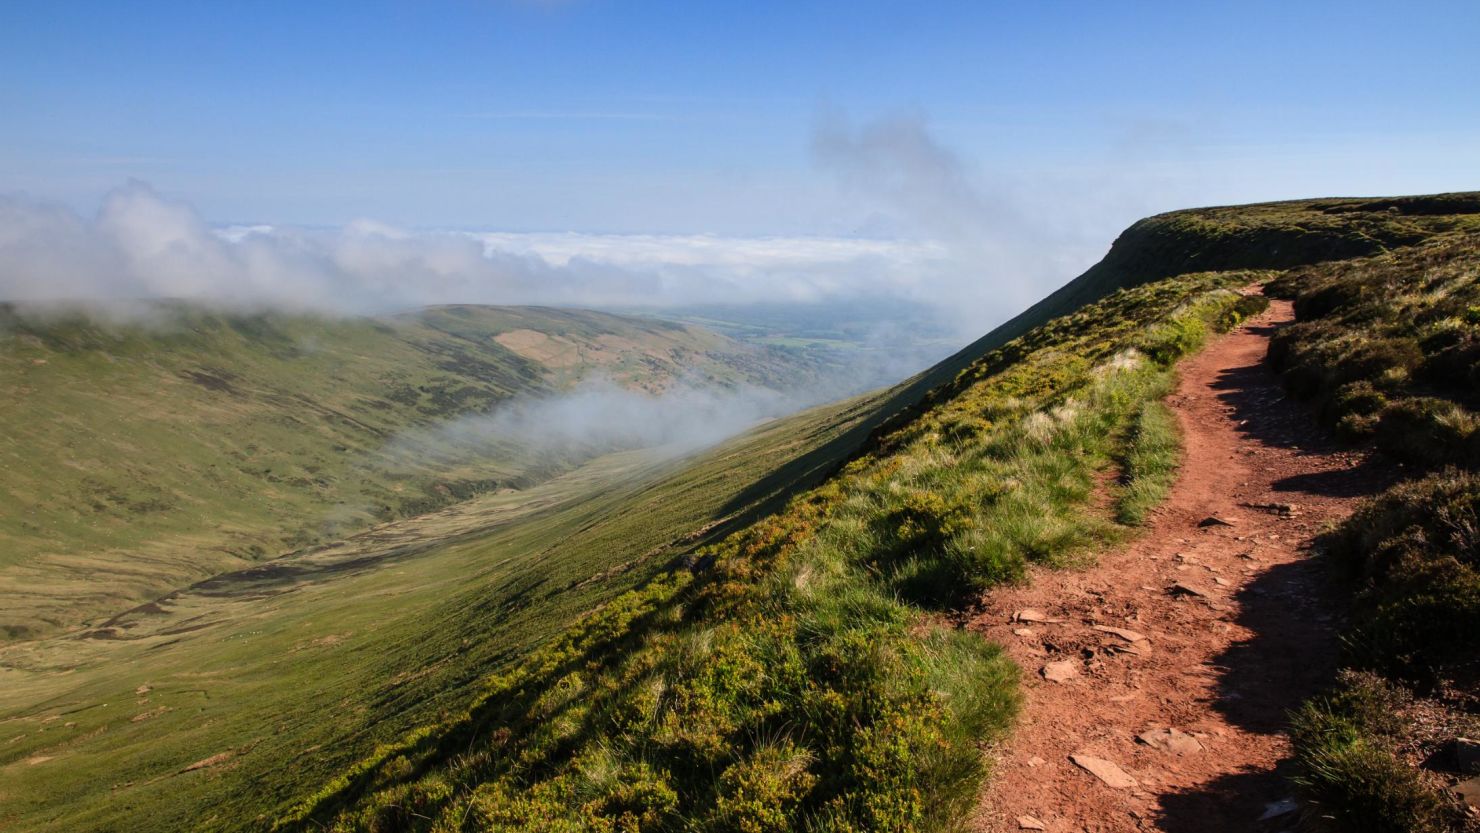 Fan y Big, a peak in the Brecon Beacons National Park, has been downgraded from mountain to hill.